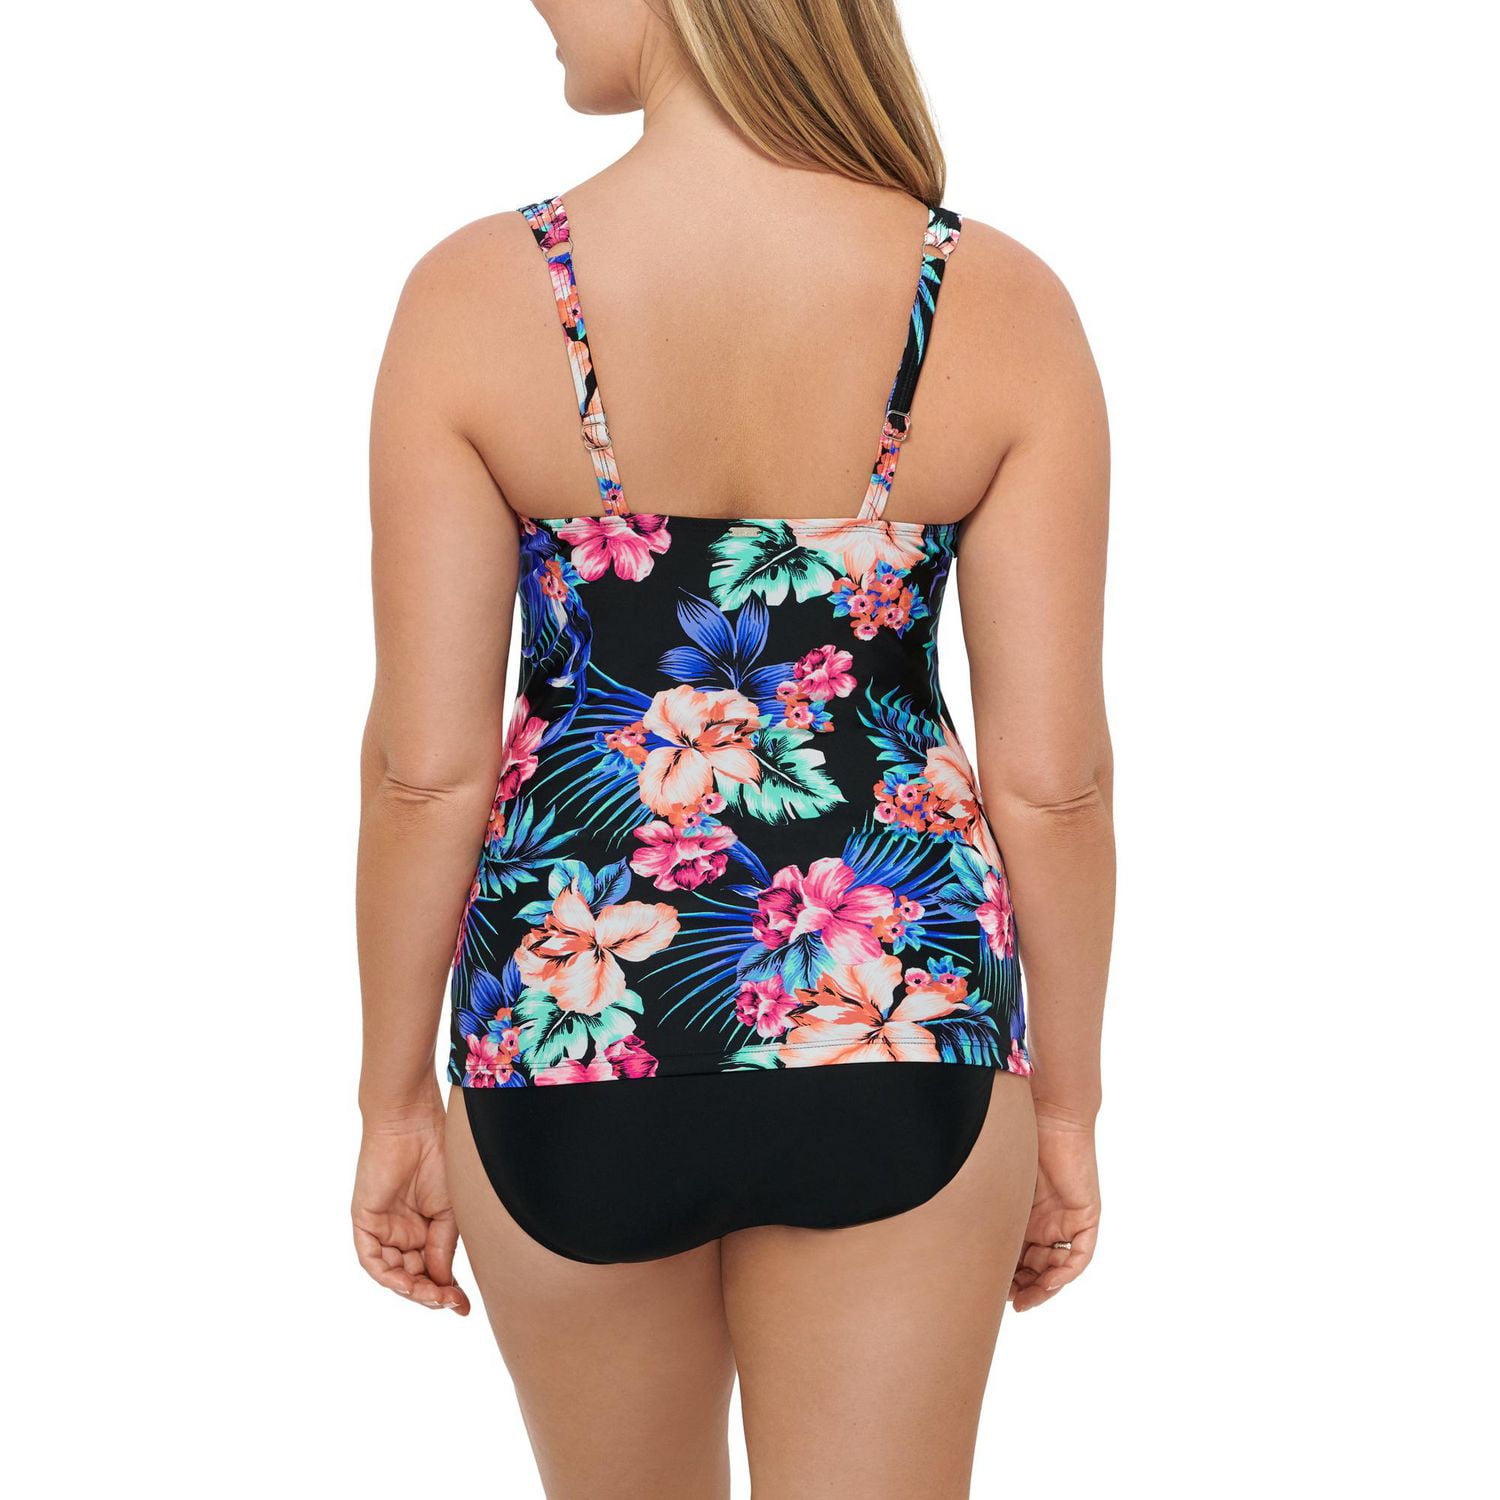 Swimwear  Shop Women's Swimwear in Cup Sizes D+ and Up – Forever